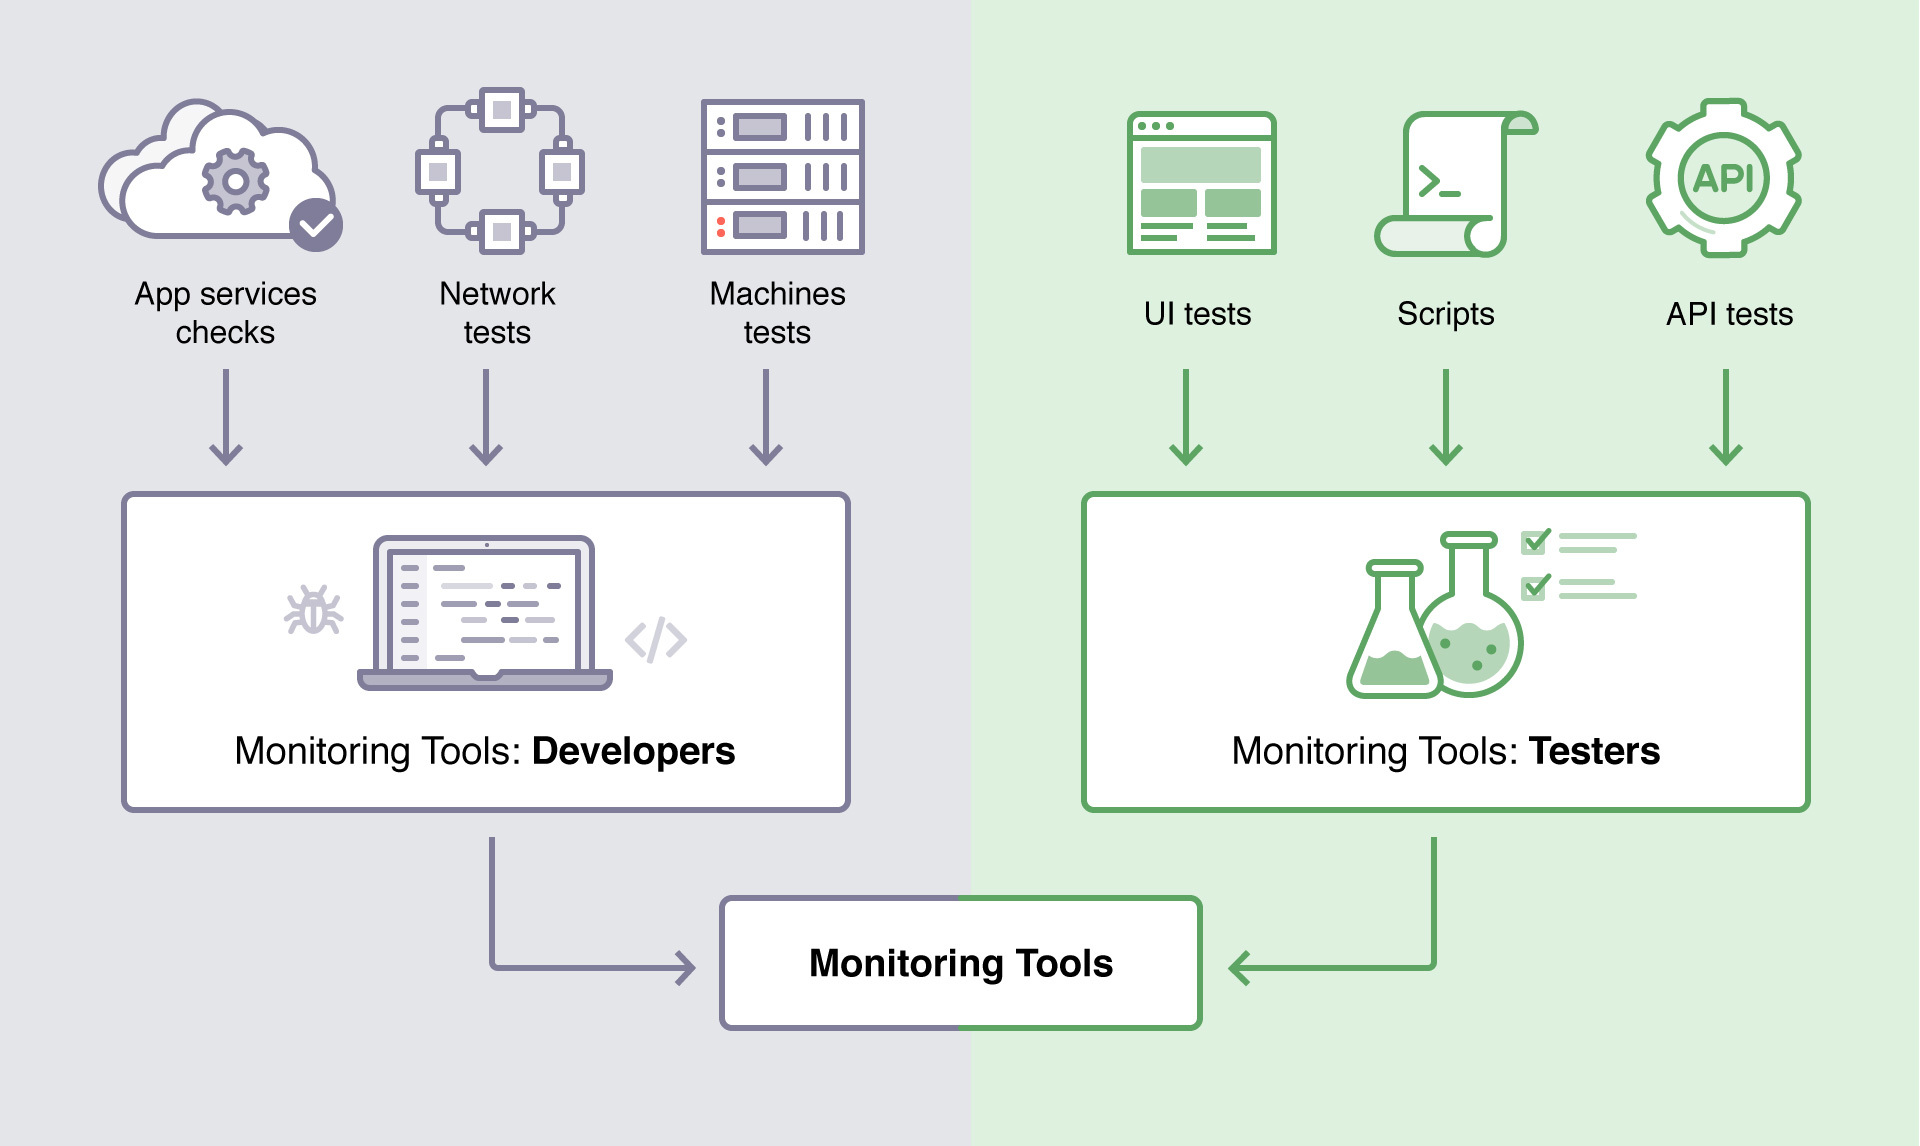 An illustration showing how app services checks, network tests, and machine tests fall under our developer monitoring tools while UI tests, scripts, and API tests fall under our tester monitoring tools.